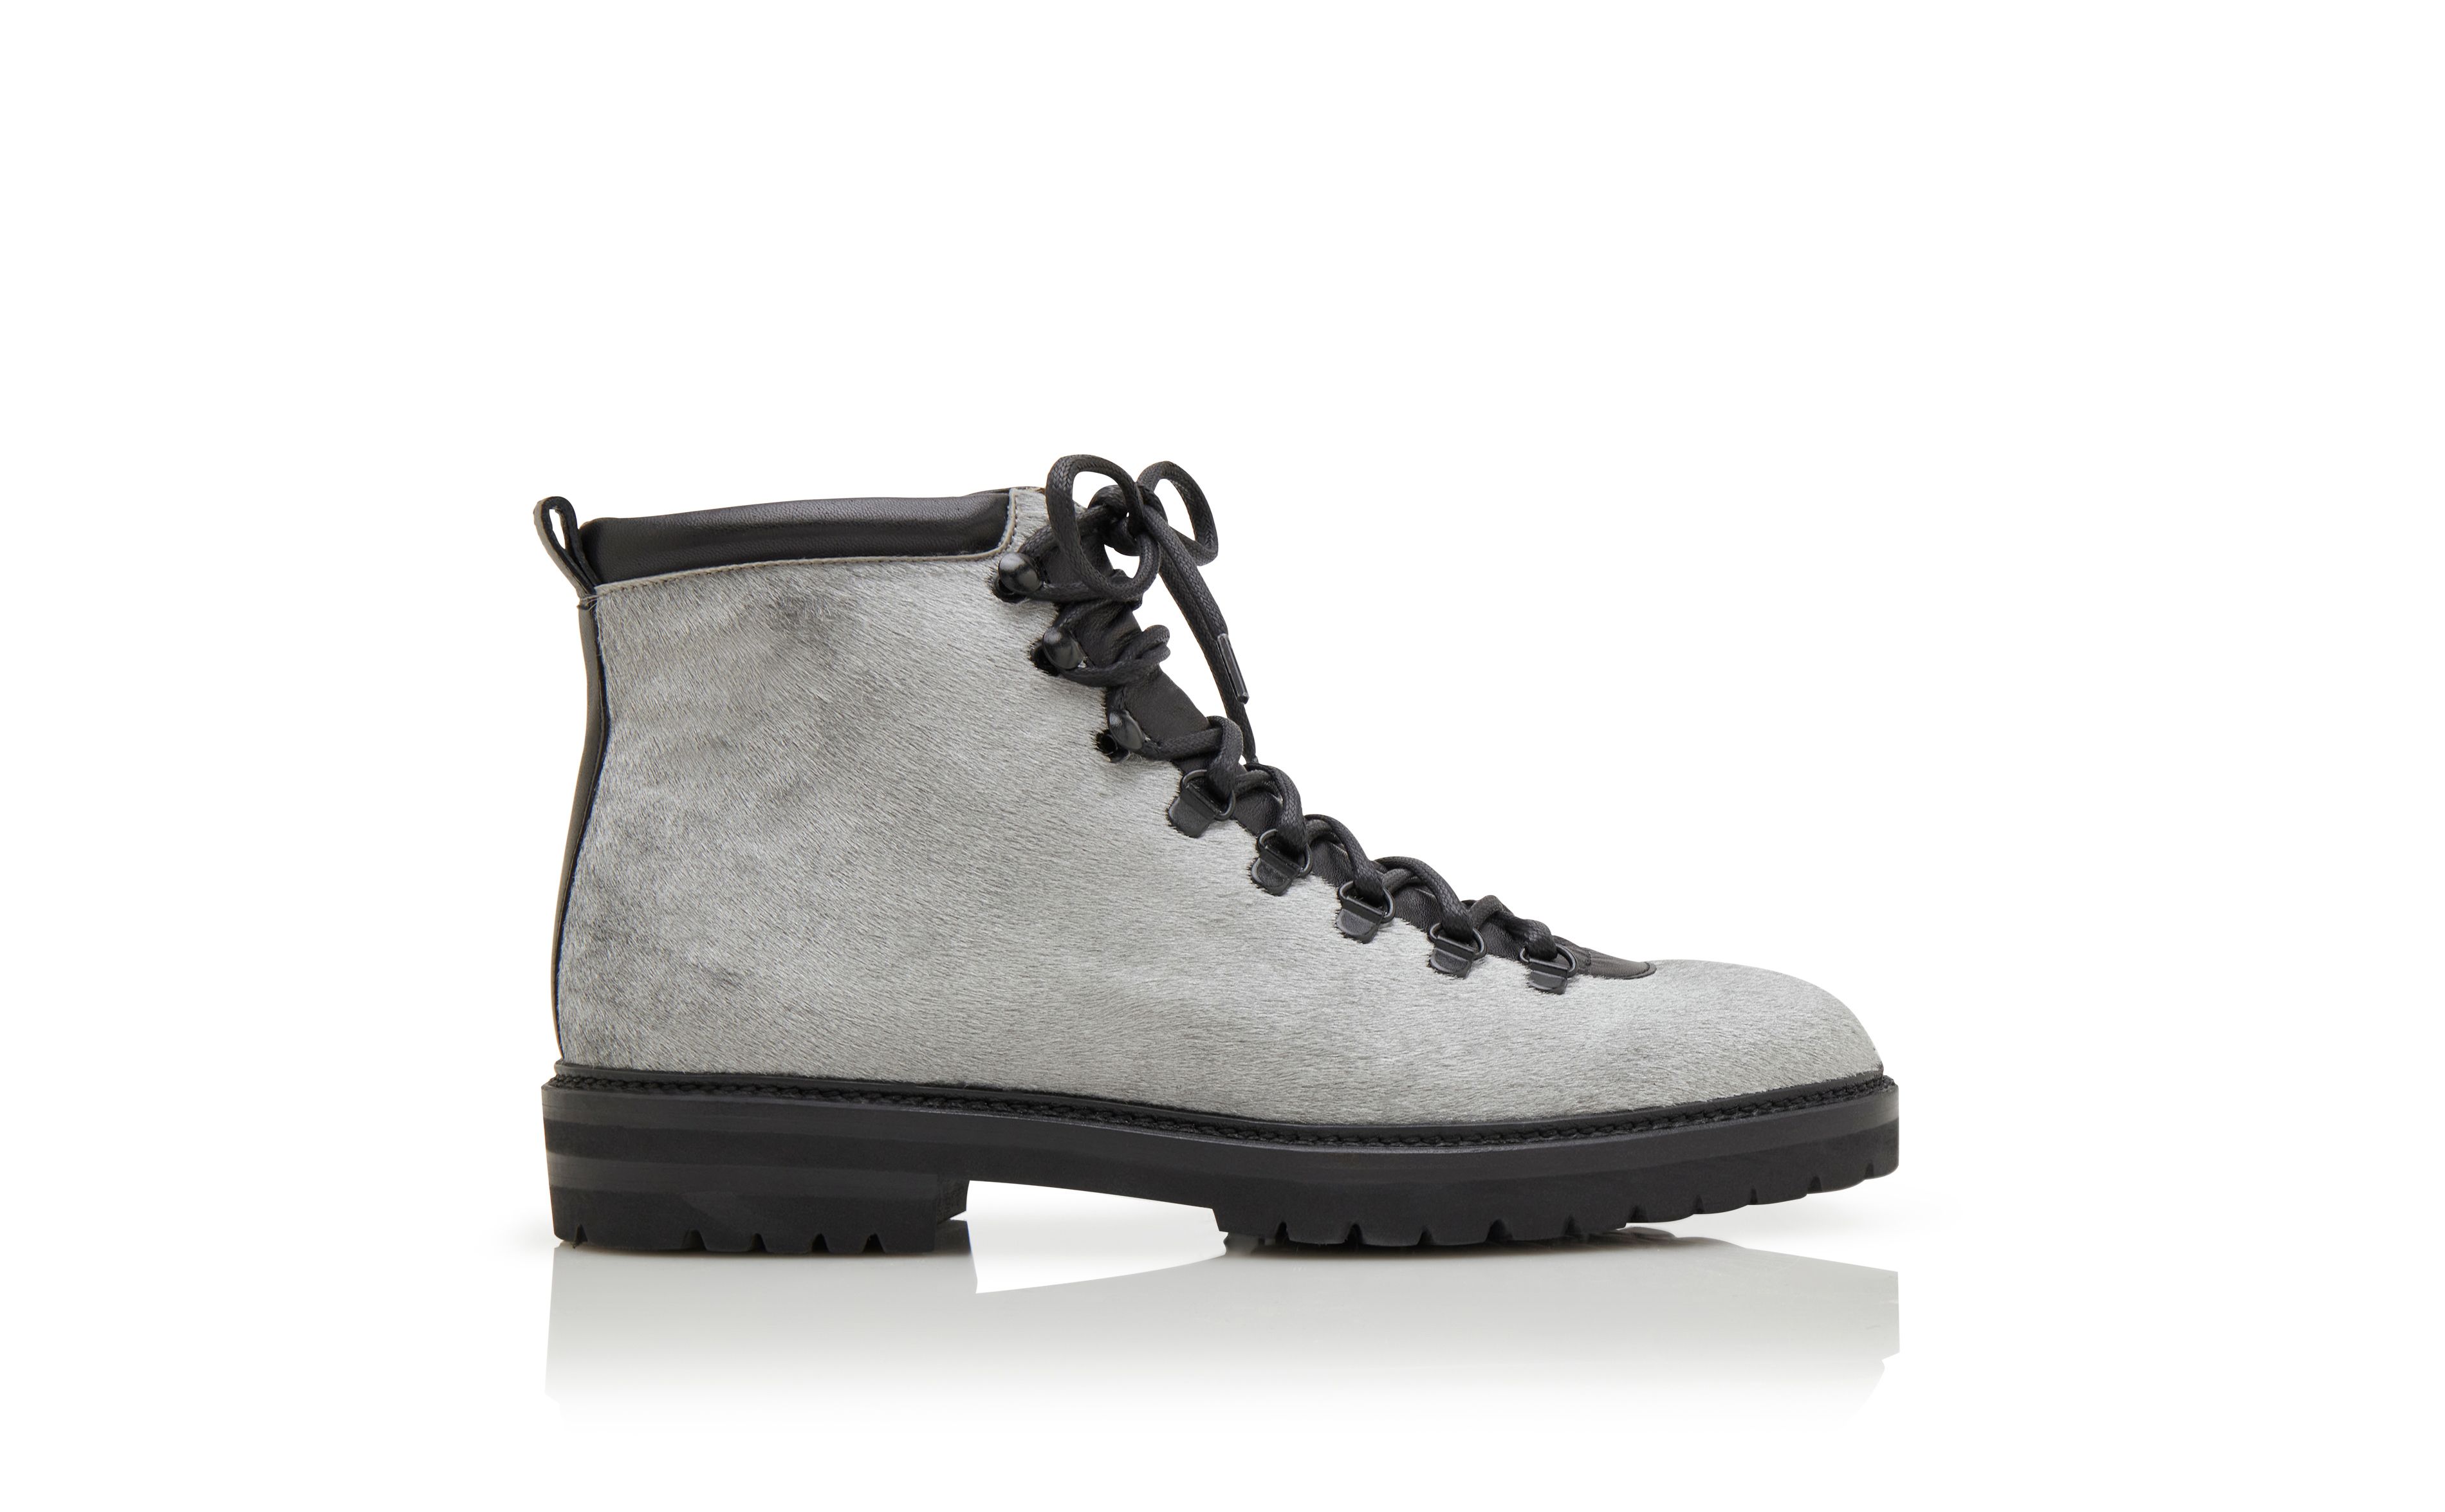 Designer Silver Calf Hair Lace Up Boots - Image Side View